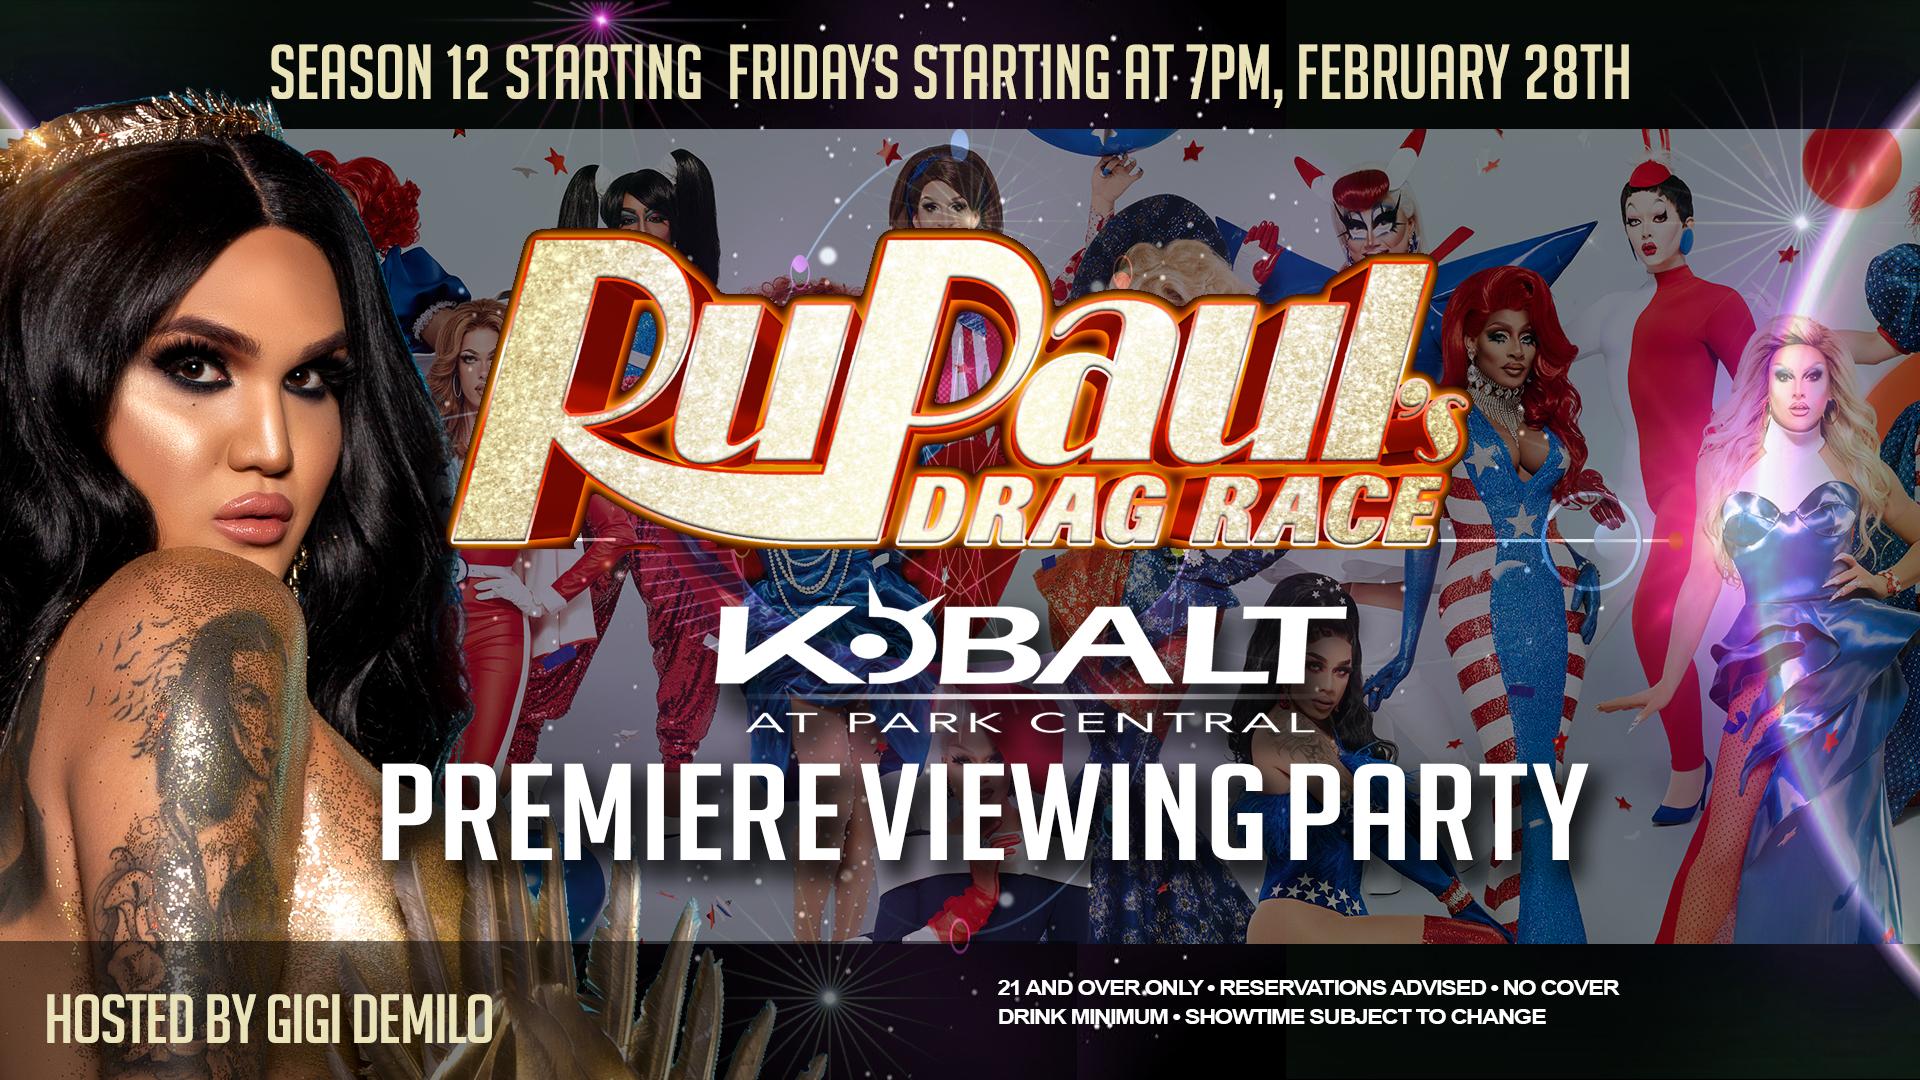 RuPaul's Drag Race Viewing Party